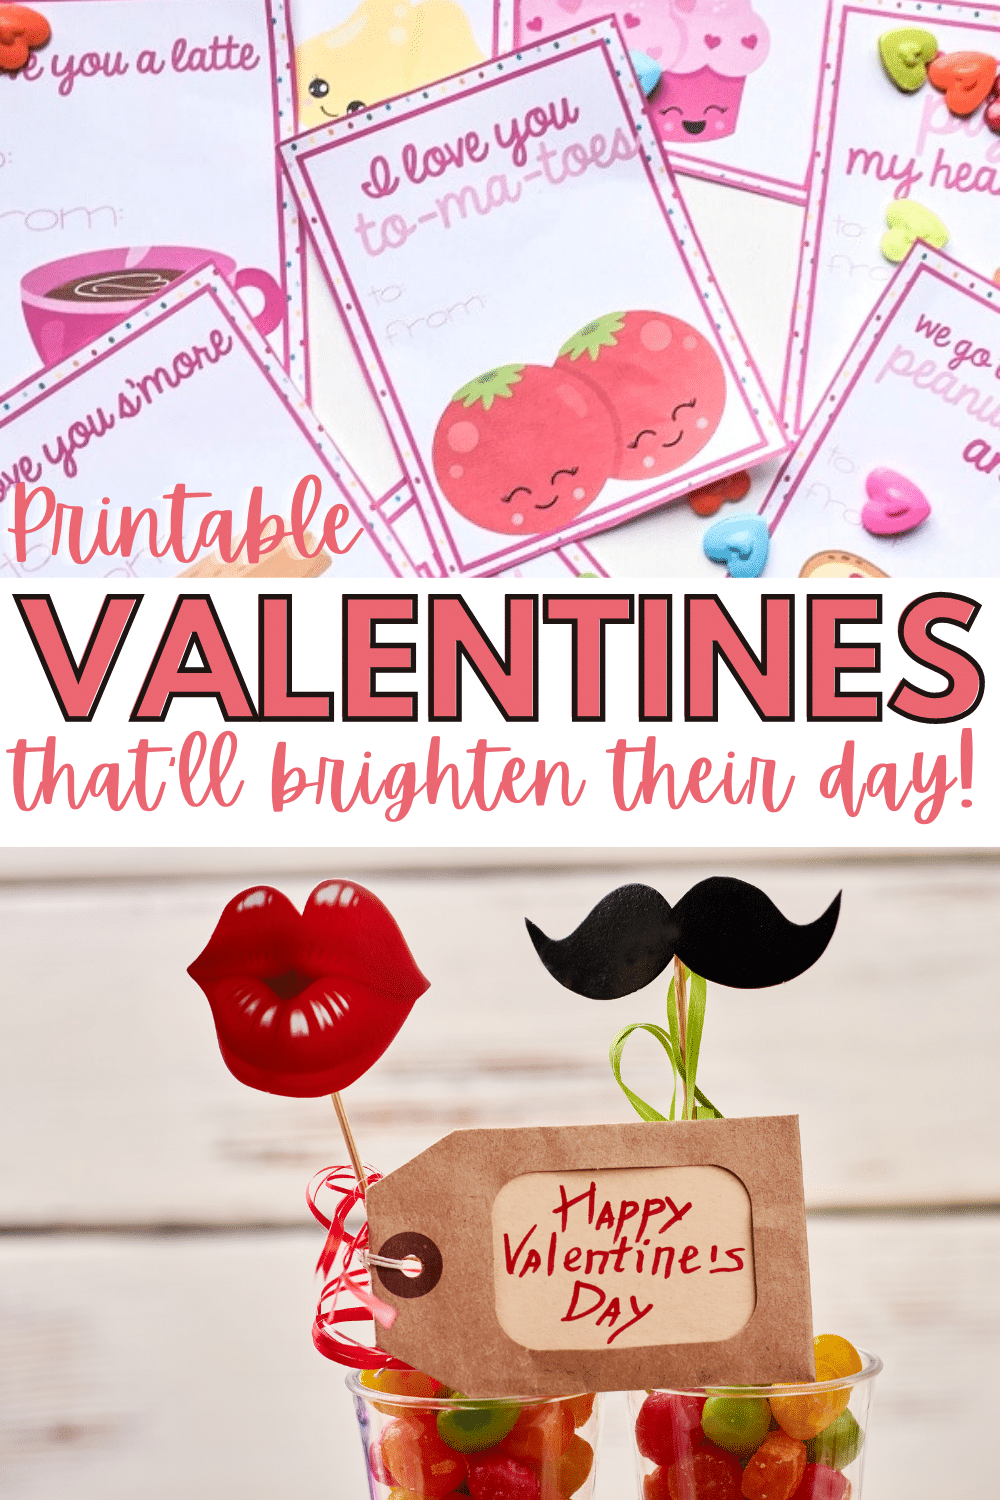 These free printable Valentines are adorable for kids to hand out on Valentine's Day. Attach a small treat or write a compliment on the back of each card! #printables #Valentines via @wondermomwannab